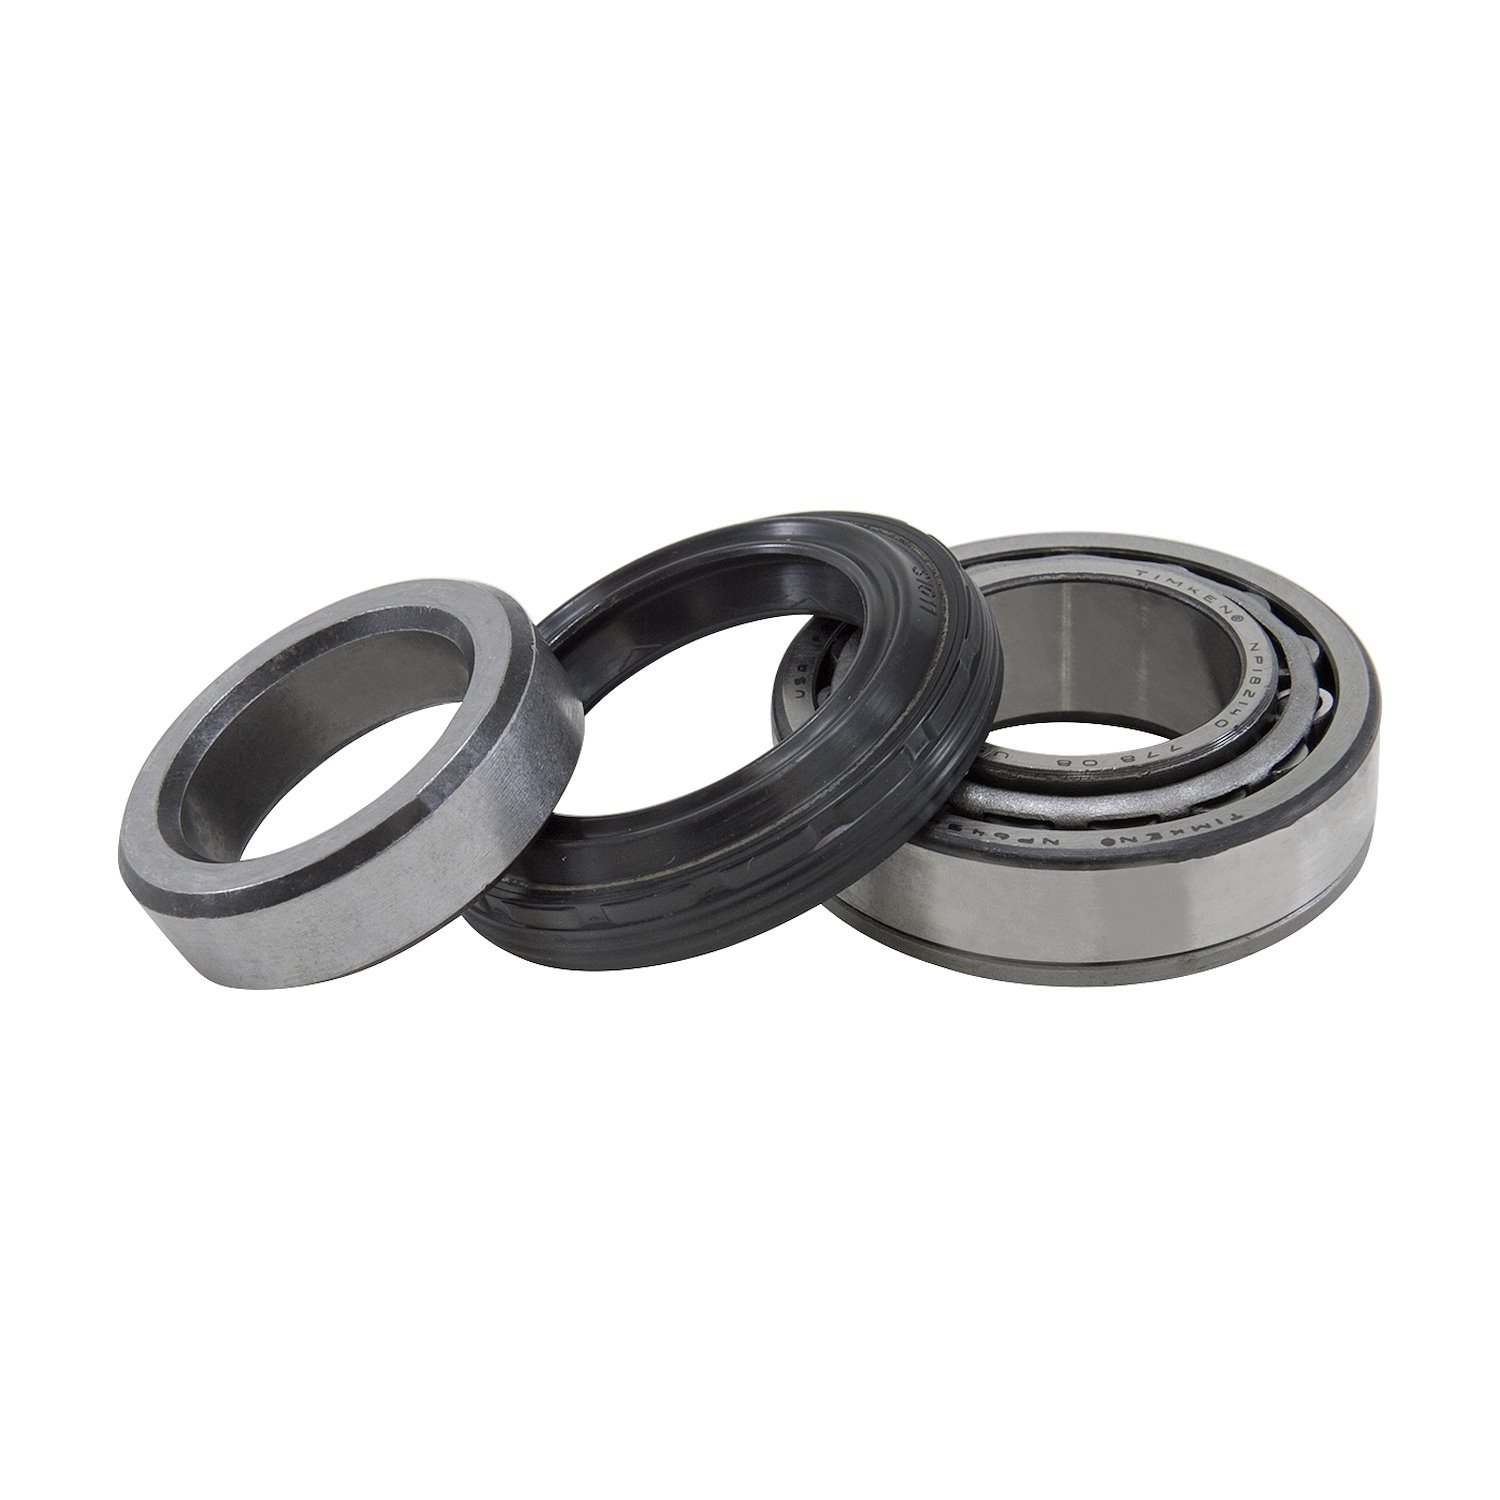 Rear Axle Bearing and Seal Kit 1993-04 Jeep Grand Cherokee Includes: